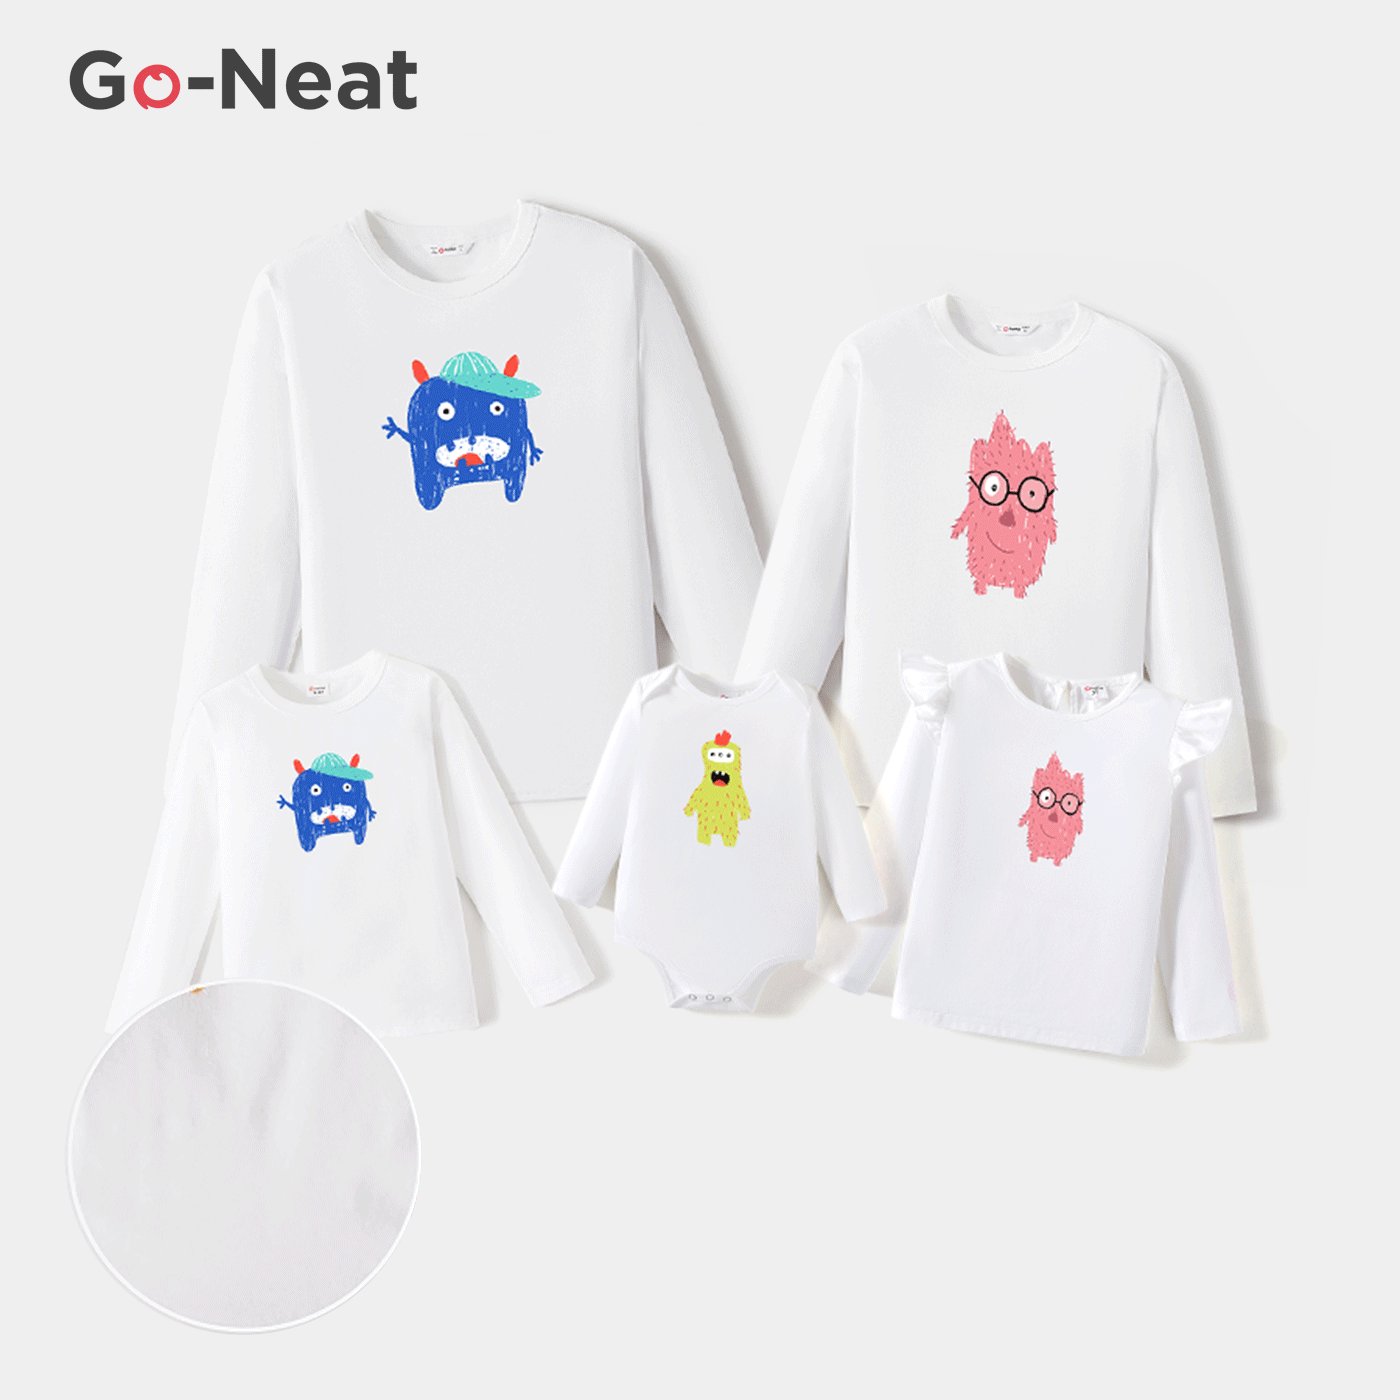 Go-Neat Water Repellent and Stain Resistant Family Matching Animal Print Long-sleeve Tee White image 1